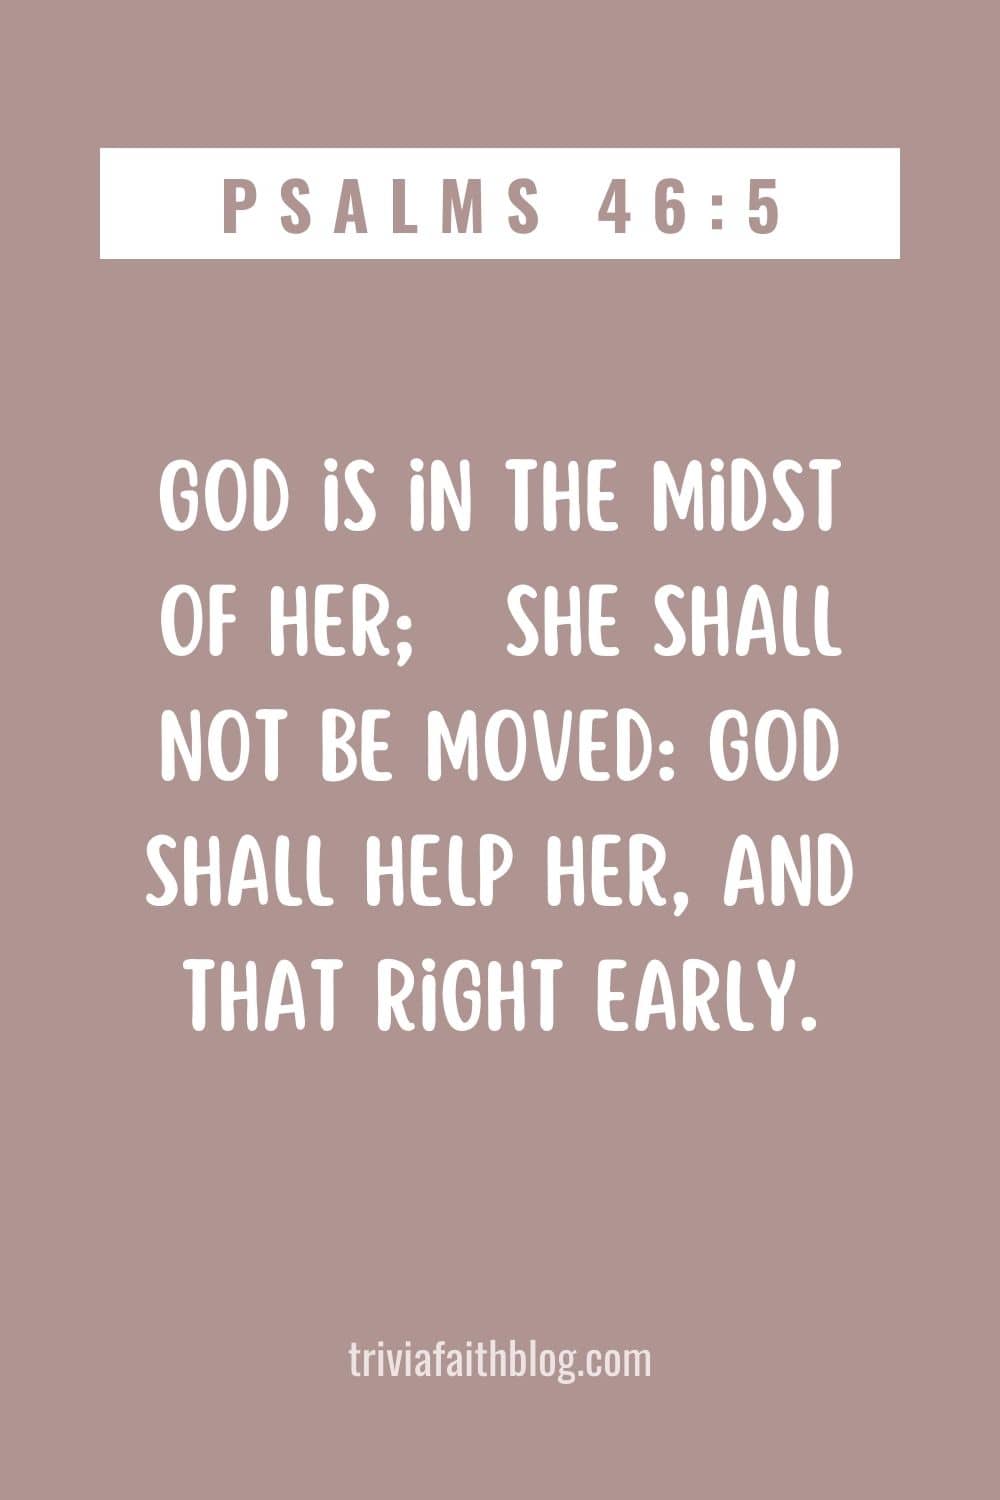 God is in the midst of her; she shall not be moved God shall help her, and that right early.